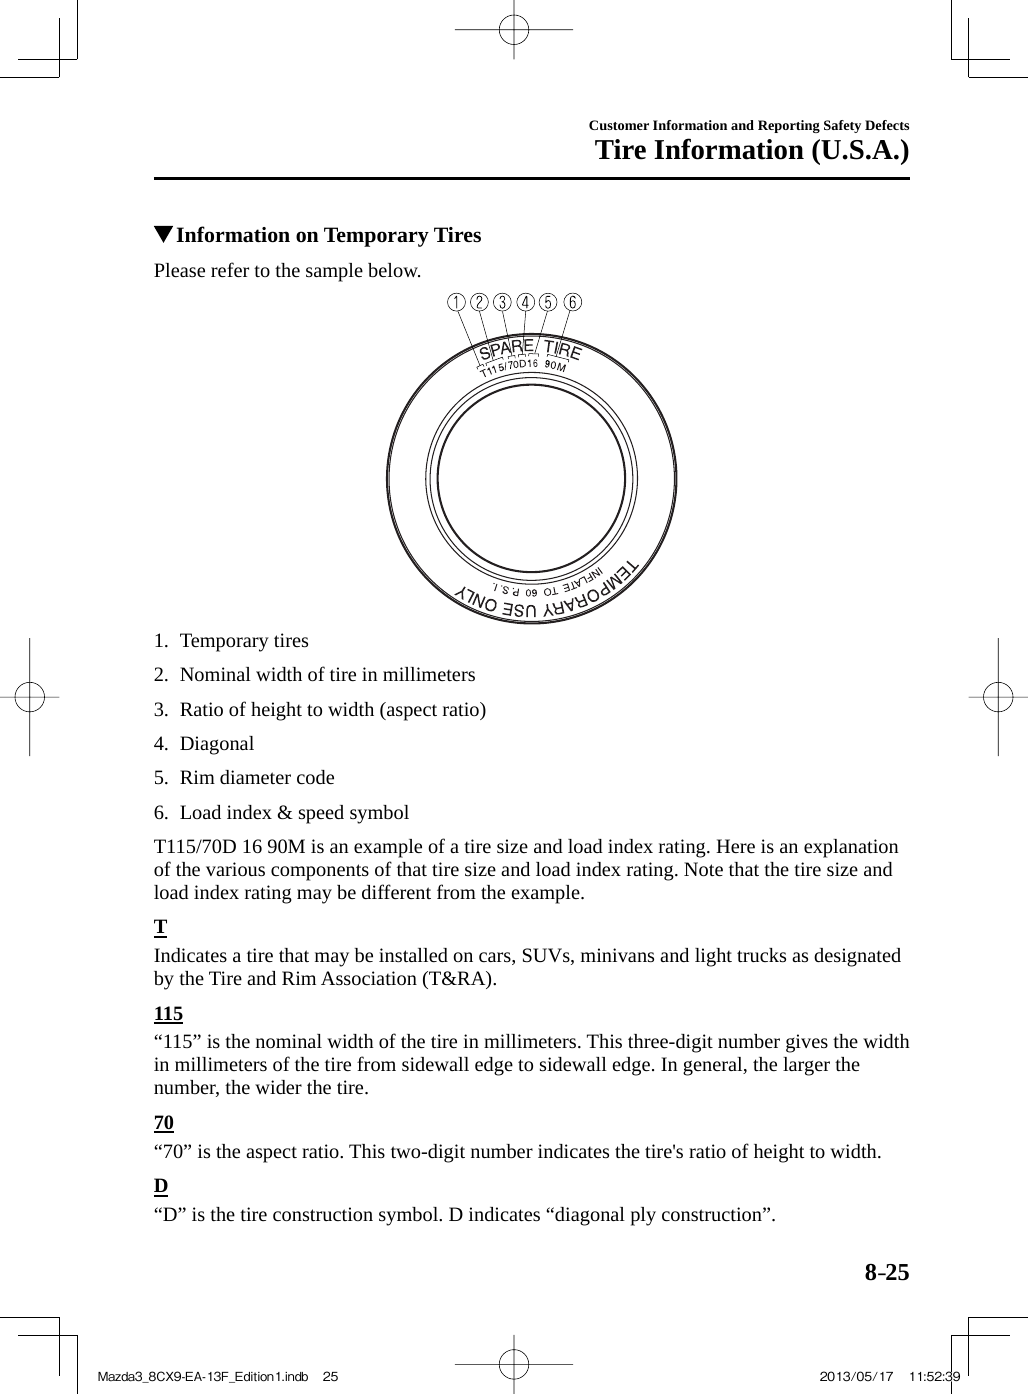 8–25Customer Information and Reporting Safety DefectsTire Information (U.S.A.)          Information on Temporary Tires    Please refer to the sample below.     1.   Temporary  tires   2.   Nominal width of tire in millimeters   3.   Ratio of height to width (aspect ratio)   4.   Diagonal   5.   Rim  diameter  code   6.   Load  index  &amp;  speed  symbol       T115/70D 16 90M  is an example of a tire size and load index rating. Here is an explanation of the various components of that tire size and load index rating. Note that the tire size and load index rating may be different from the example.  T    Indicates a tire that may be installed on cars, SUVs, minivans and light trucks as designated by the Tire and Rim Association (T&amp;RA).  1 1 5    “115” is the nominal width of the tire in millimeters. This three-digit number gives the width in millimeters of the tire from sidewall edge to sidewall edge. In general, the larger the number, the wider the tire.  7 0    “70” is the aspect ratio. This two-digit number indicates the tire&apos;s ratio of height to width.  D    “D” is the tire construction symbol. D indicates “diagonal ply construction”.Mazda3_8CX9-EA-13F_Edition1.indb   25Mazda3_8CX9-EA-13F_Edition1.indb   25 2013/05/17   11:52:392013/05/17   11:52:39